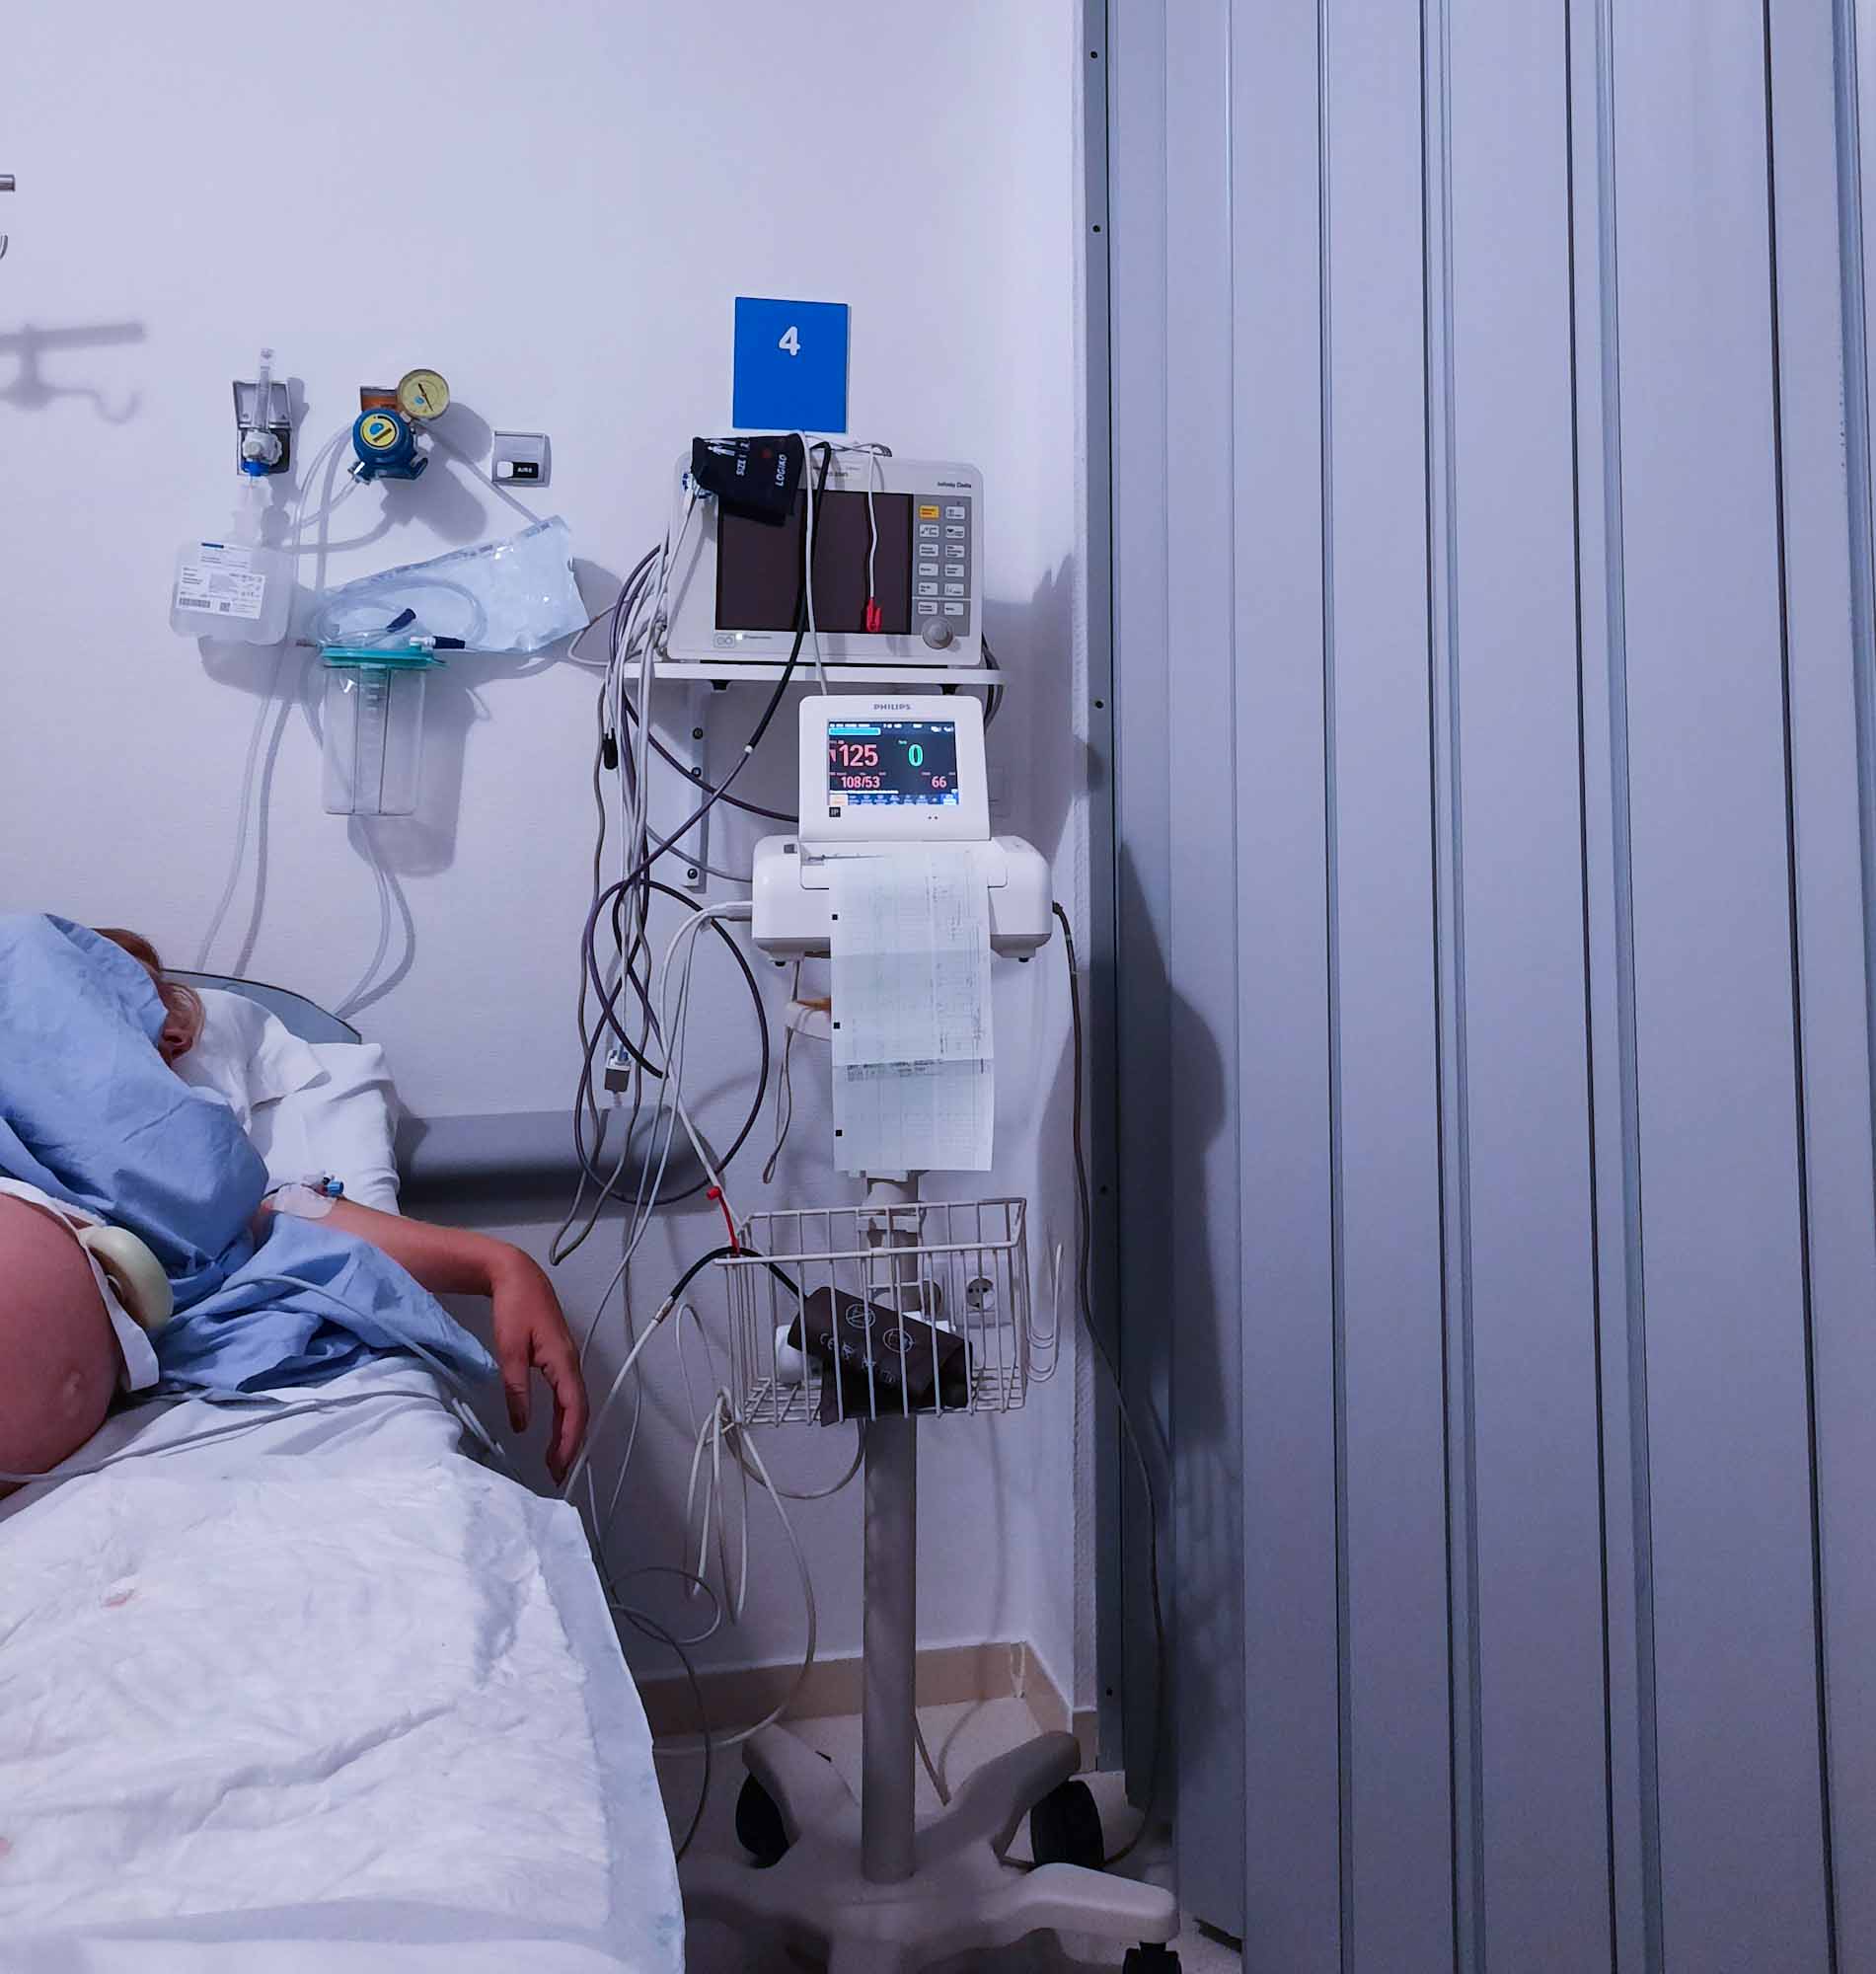 Inside a hospital room with a pregnant woman under observation